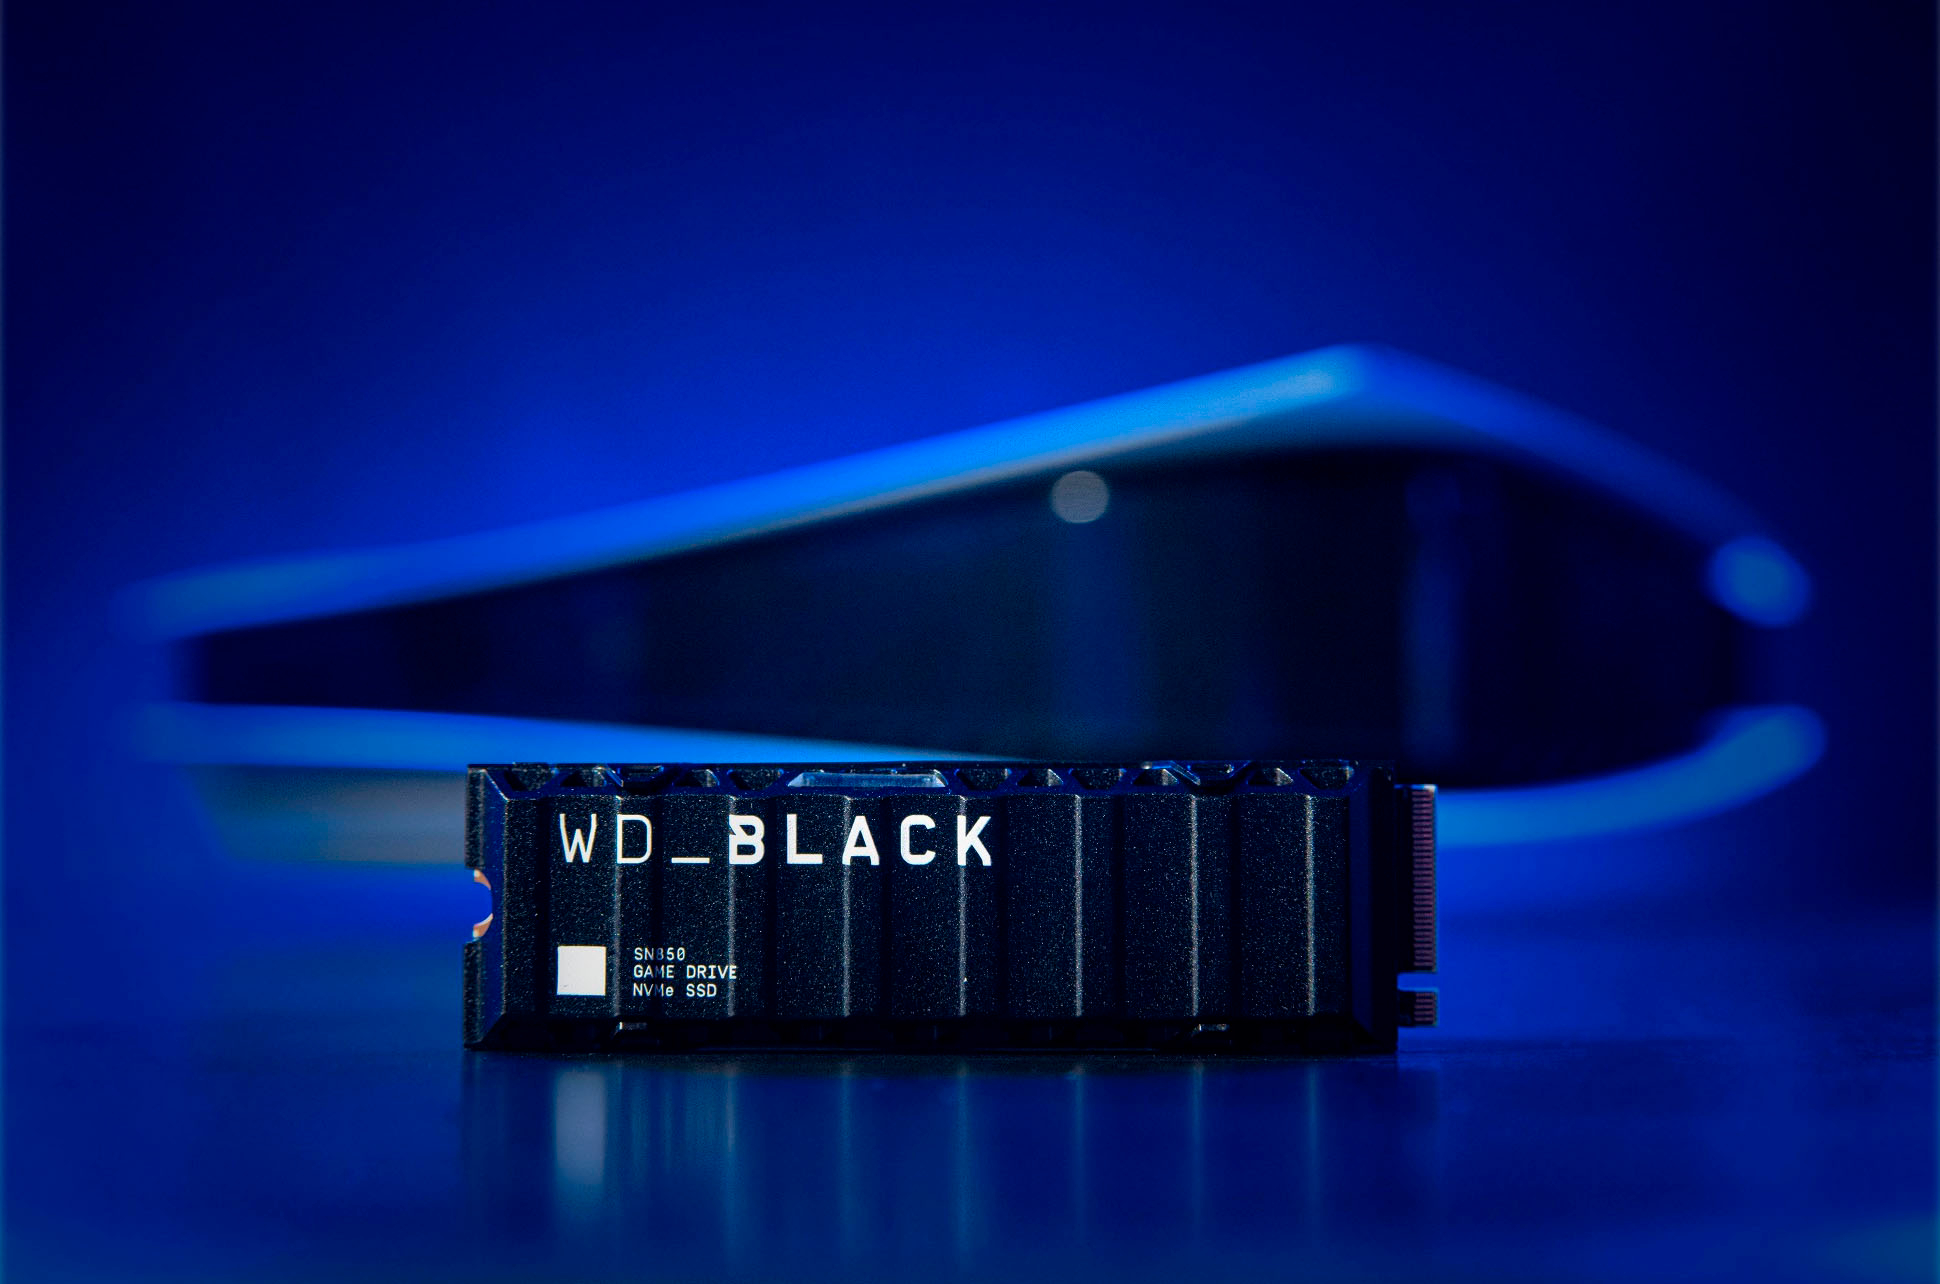  WD_BLACK 1TB SN850 NVMe SSD for PS5 Consoles Solid State Drive  with Heatsink - Gen4 PCIe, M.2 2280, Up to 7,000 MB/s - WDBBKW0010BBK-WRSN  & Playstation DualSense Charging Station